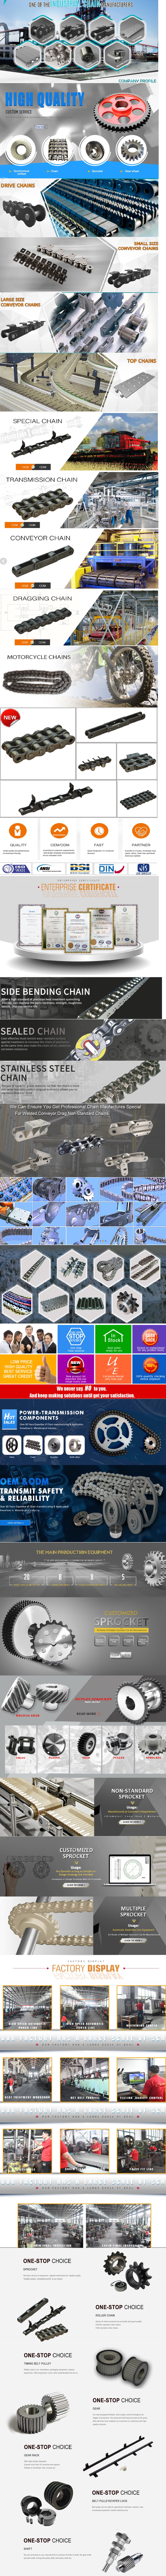 DIN  made in China - replacement parts -  in Lusaka Zambia  Plastic Roller Chain for Conveyor System with ce certificate top quality low price